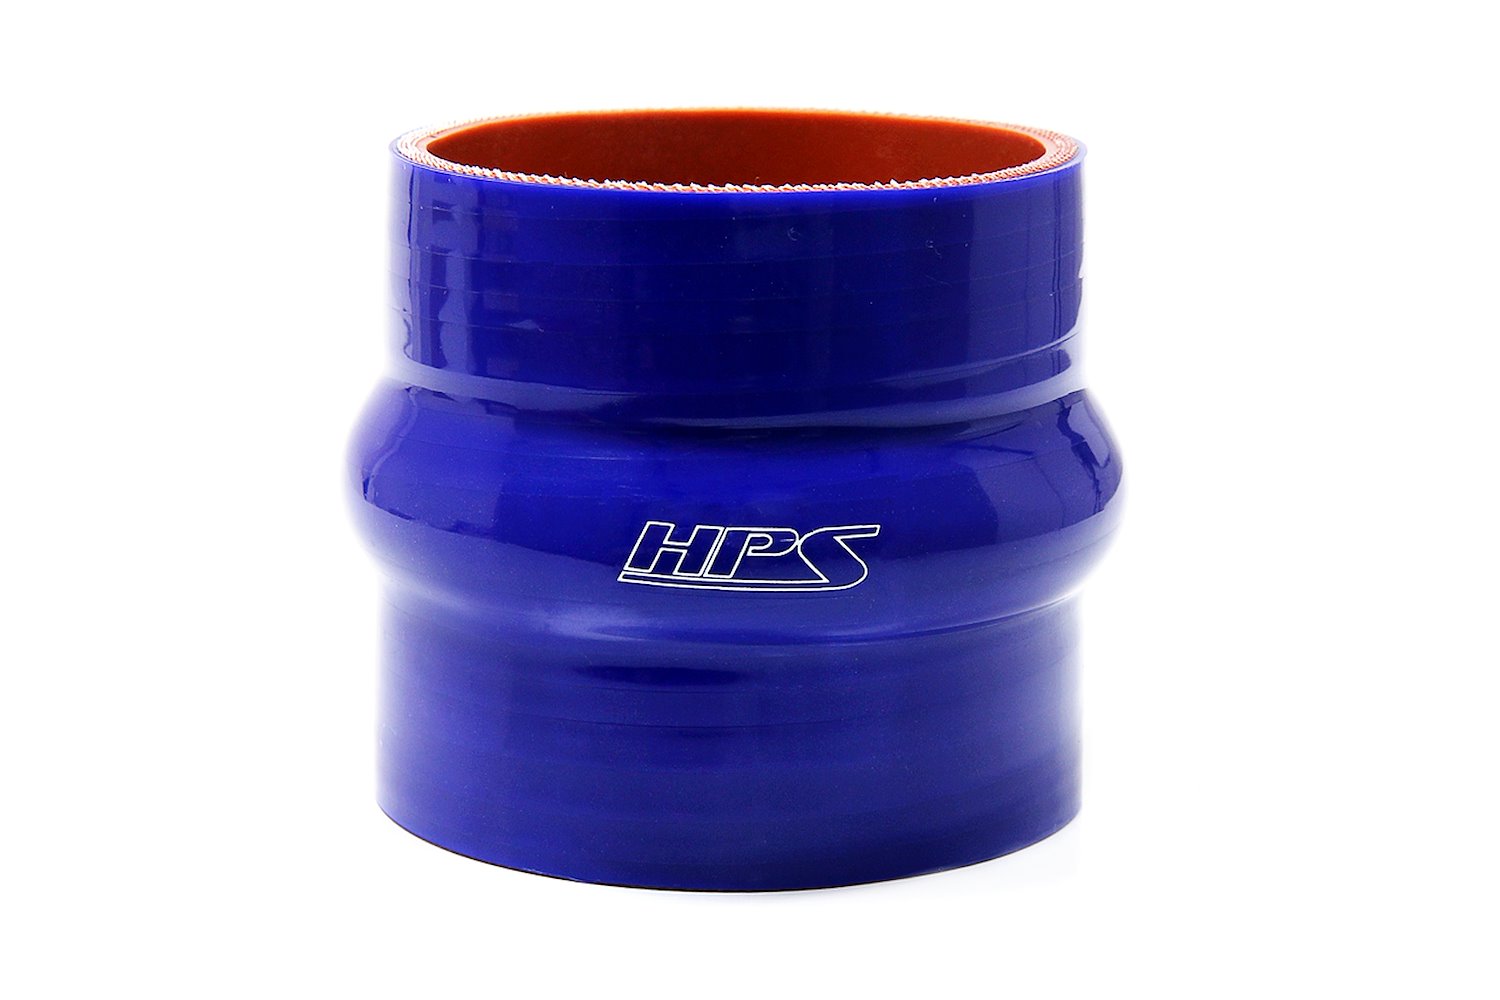 HTSHC-138-L4-BLUE Silicone Hump Coupler Hose, High-Temp 4-Ply Reinforced, 1-3/8 in. ID, 4 in. Long, Blue